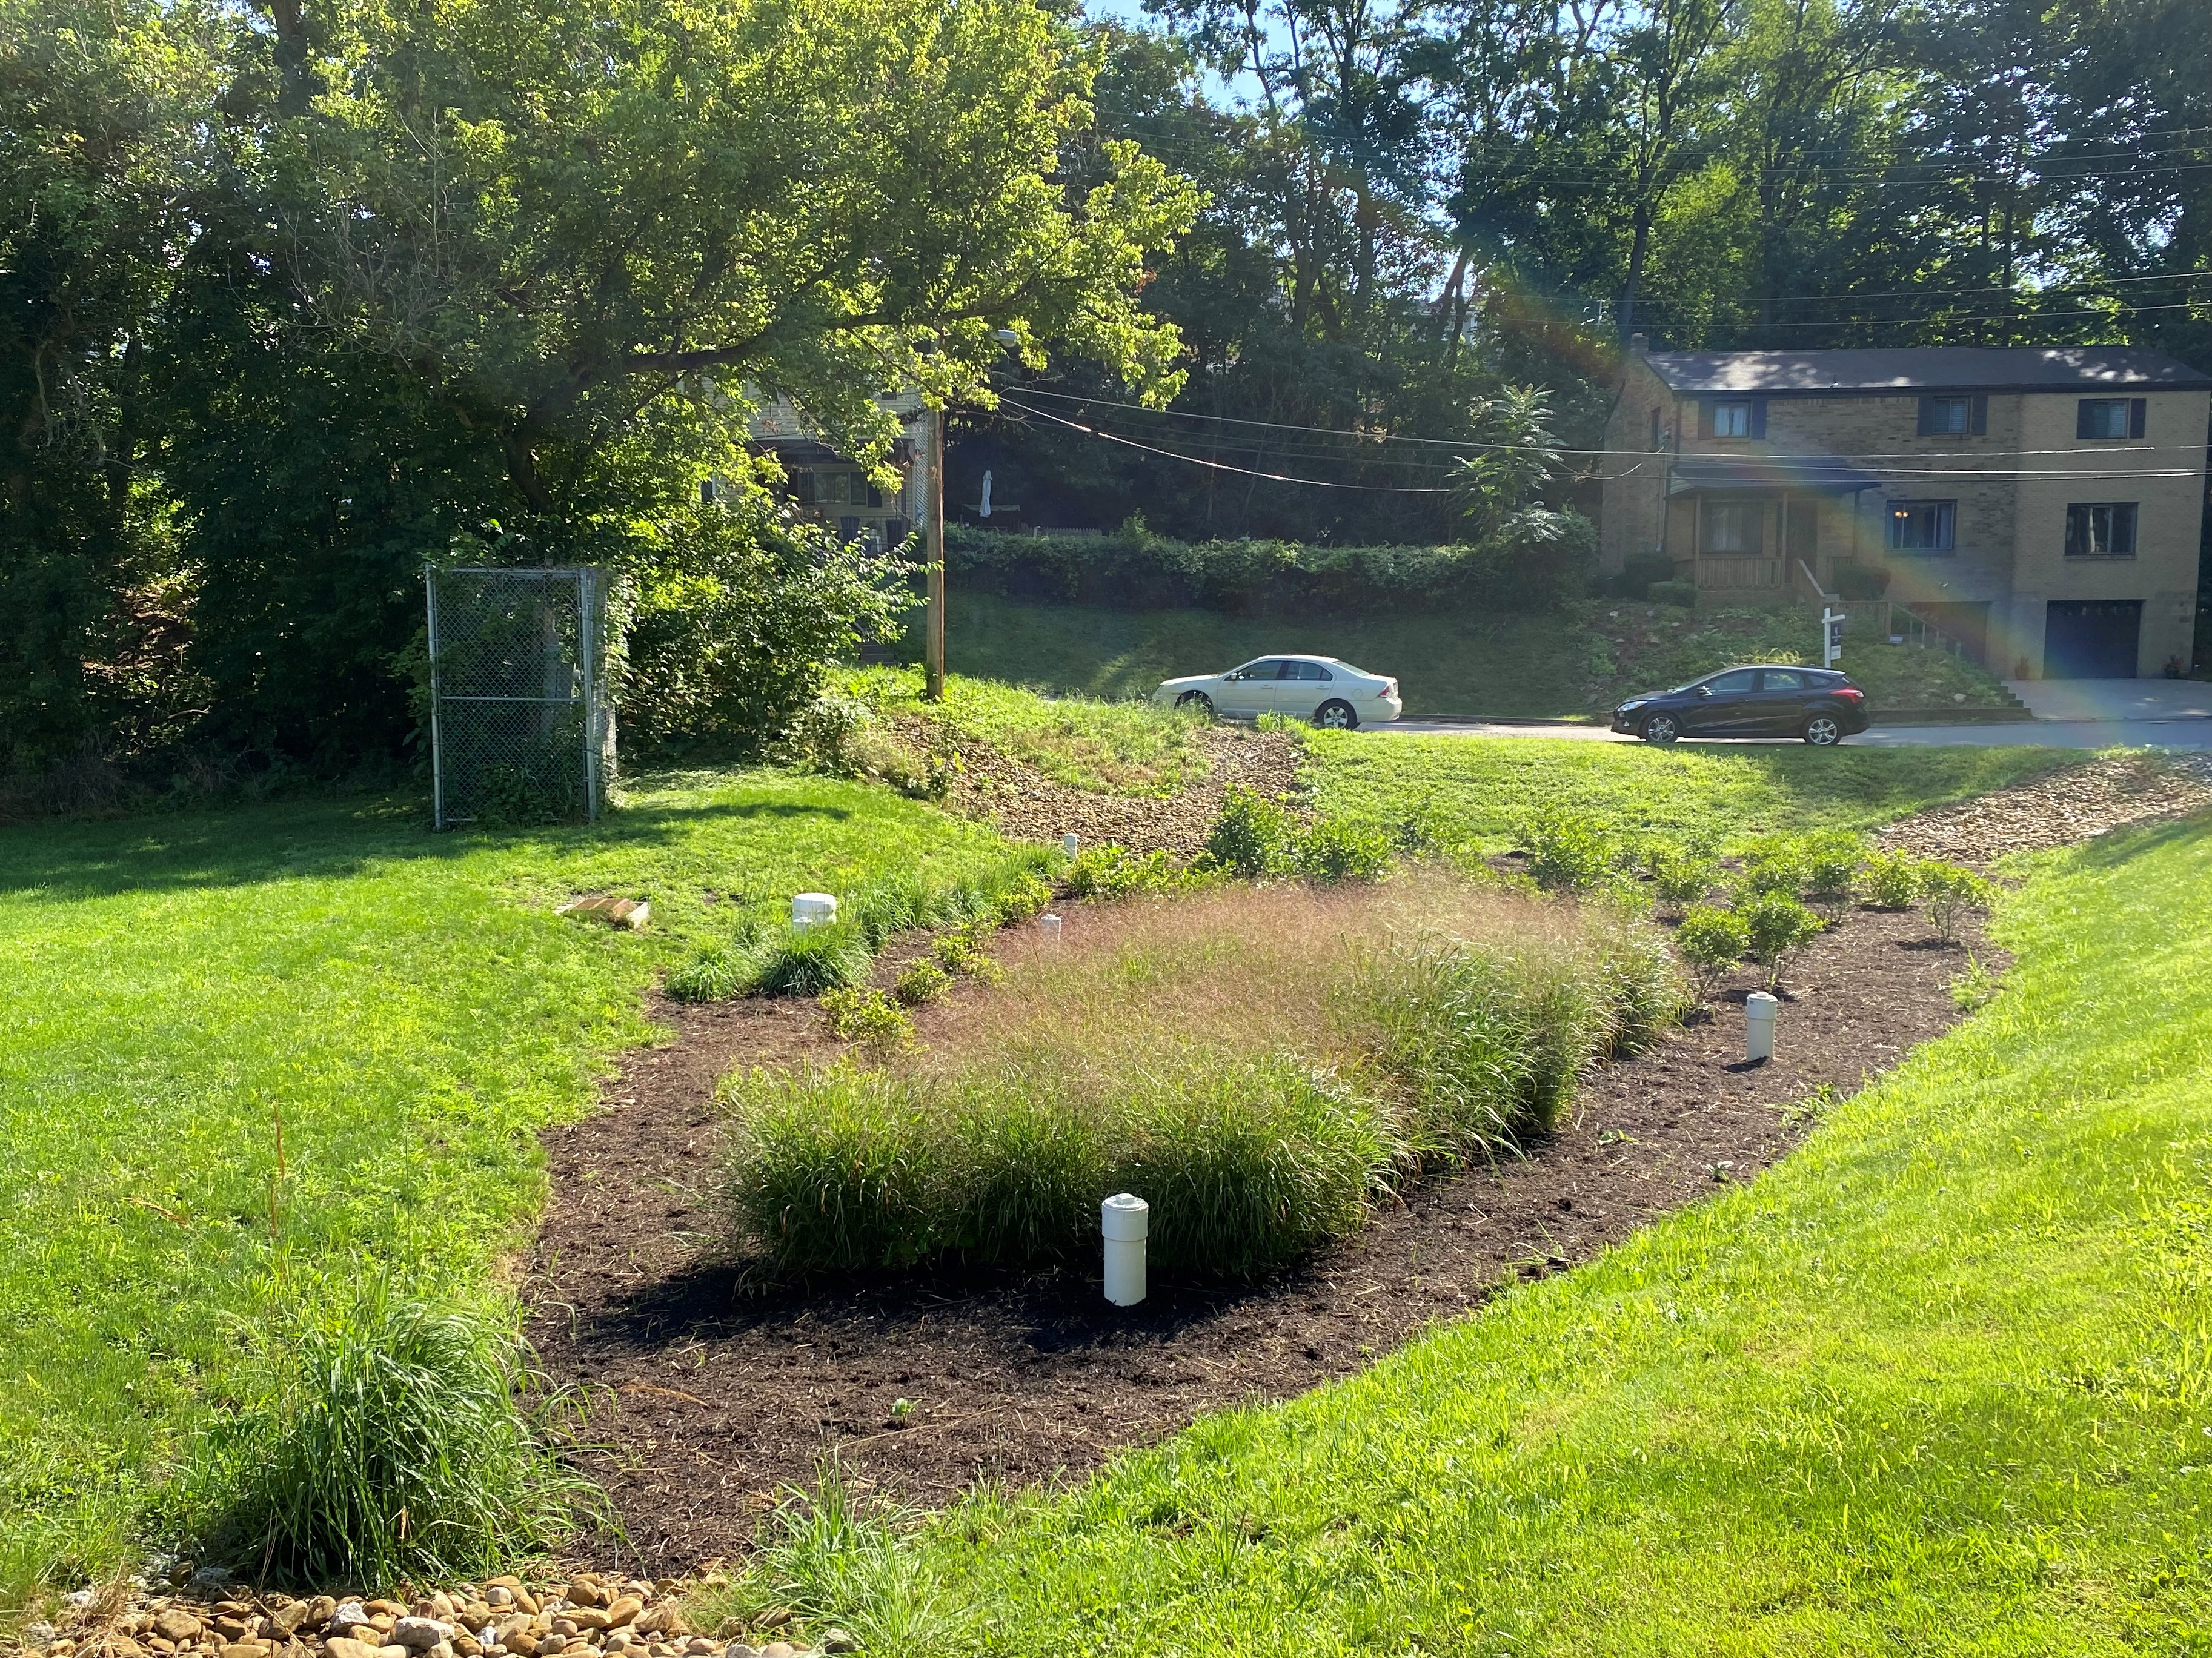 Photo of the Volunteers Field rain garden with a rainbow visible